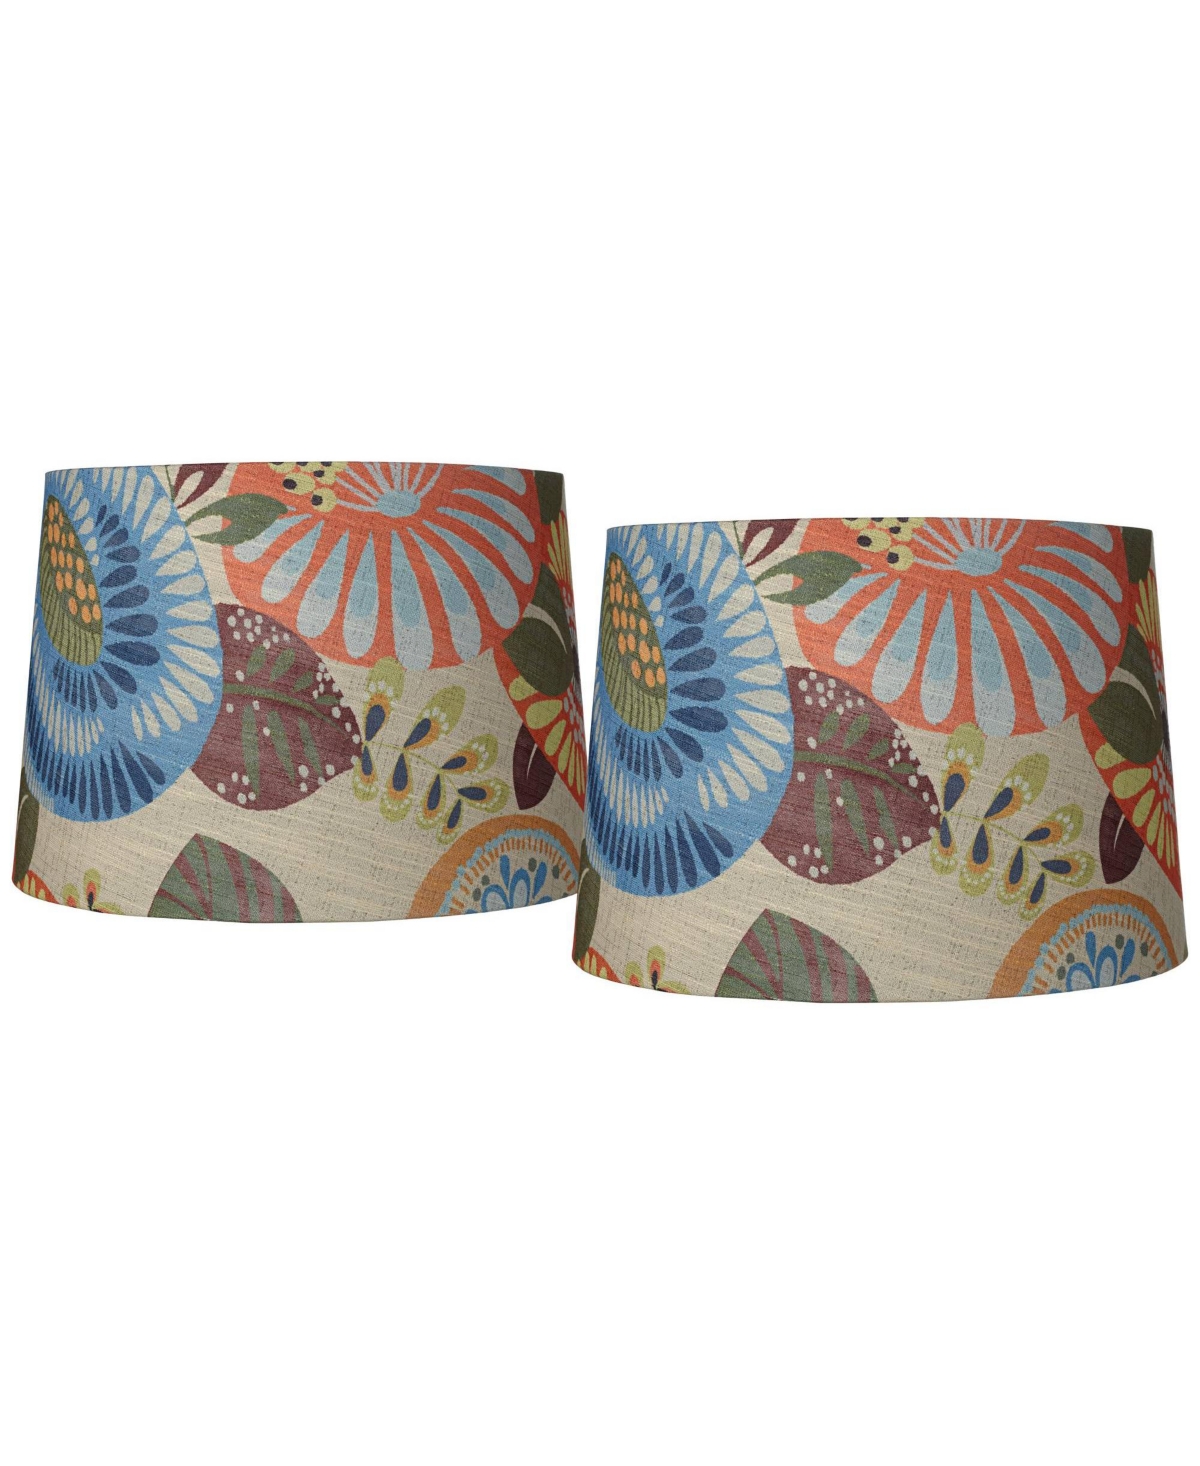 Springcrest Set Of 2 Tapered Drum Lamp Shades Multi Color Tropic Abstract Floral Medium 14" Top X 16" Bottom X 1 In Open Miscellaneous